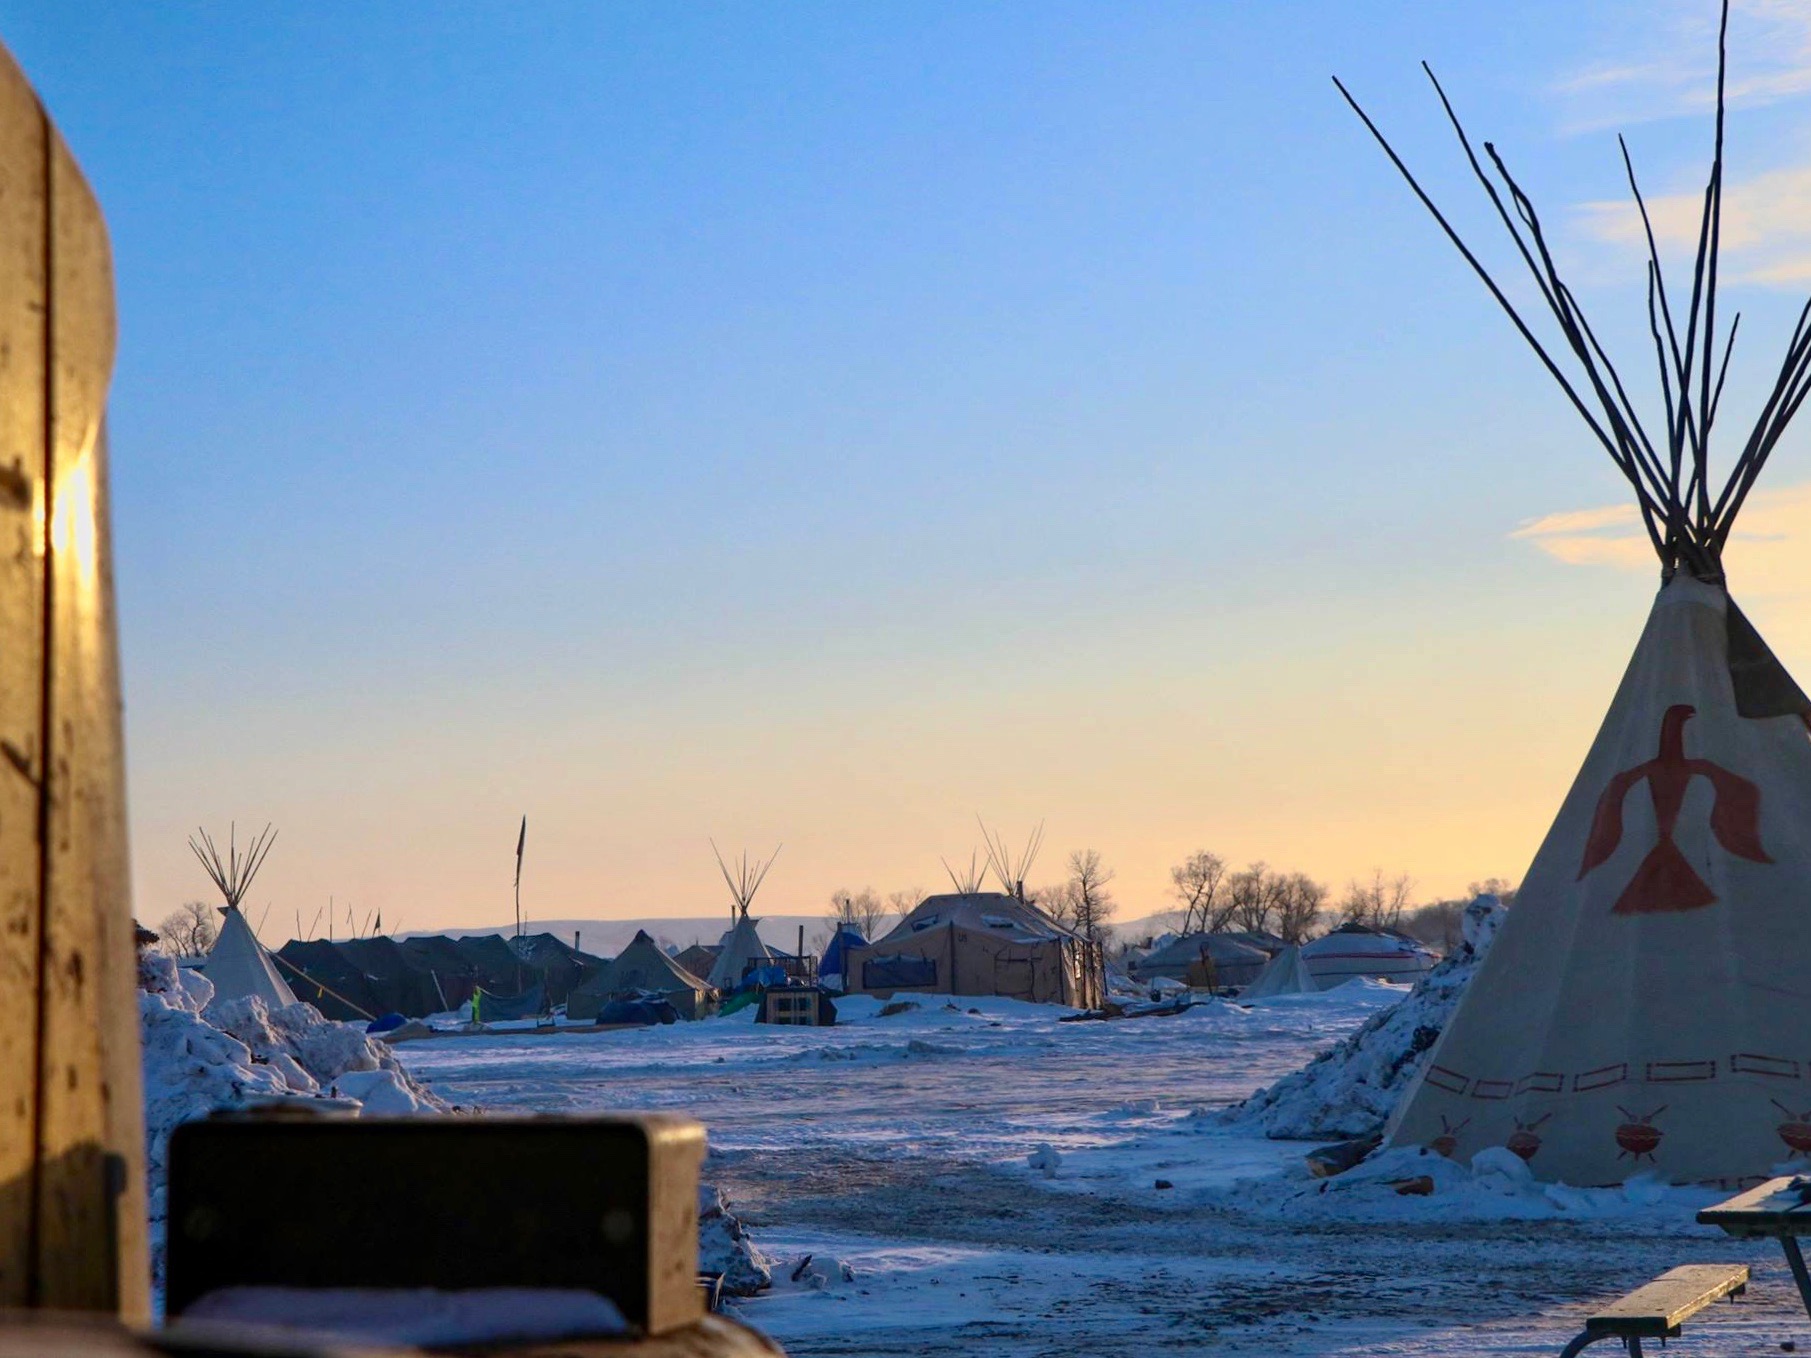 Tribes head back to court in hopes of halting Dakota Access Pipeline